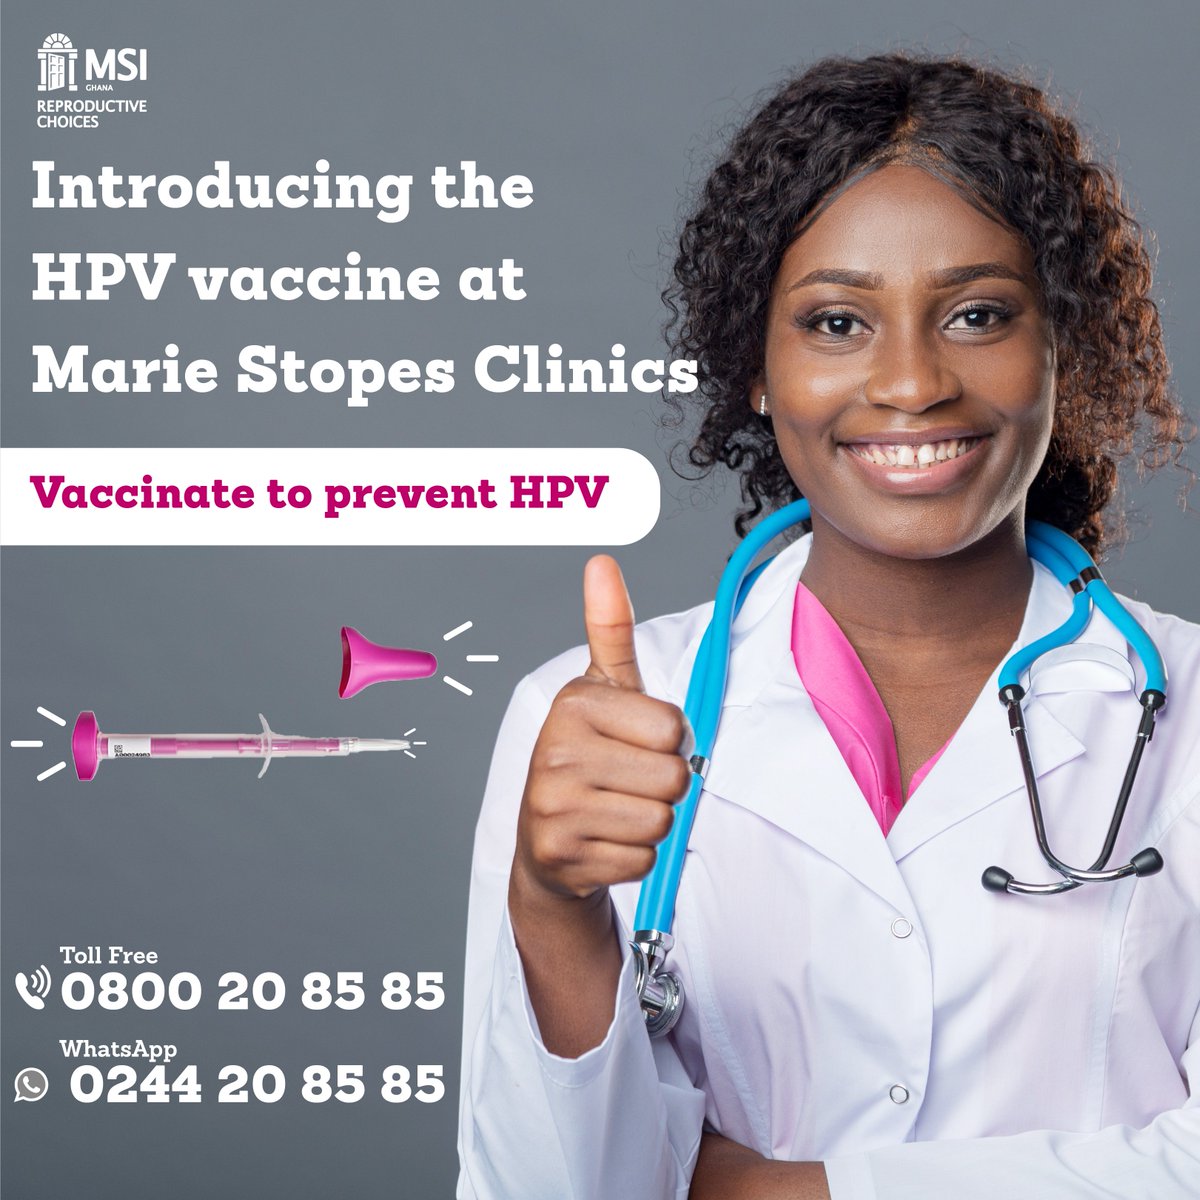 HPV vaccines delivers a solid protection against Human Papillomavirus, the virus that causes cervical cancer. It's less costly and available at all Marie Stopes Ghana clinics.
Chat with us on whatsapp 0244208585 for further information.
#HPV
#hpvawareness
#HumanPapillomavirus